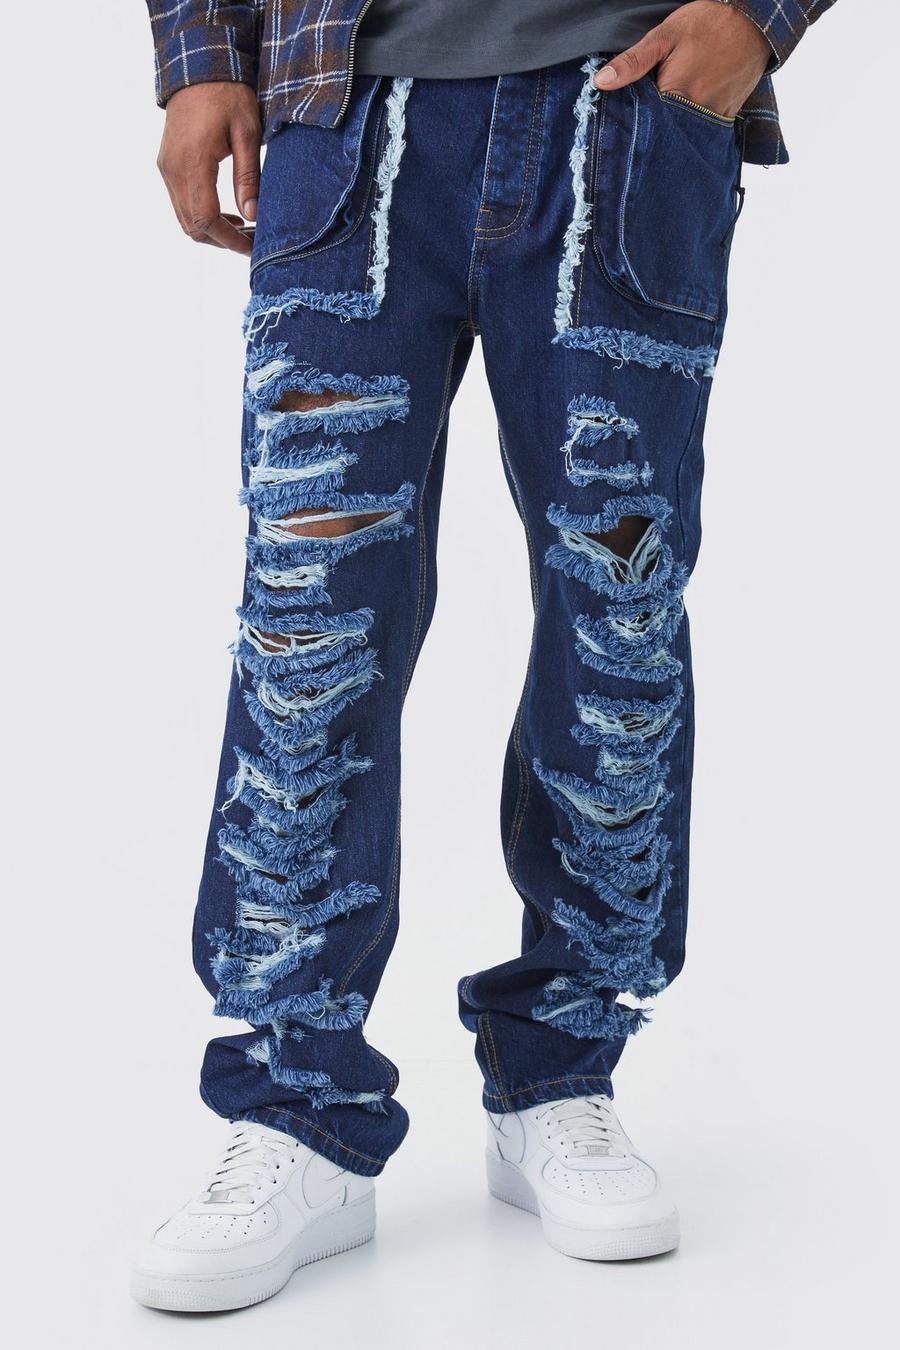 Indigo Tall Relaxed Rigid Distressed Ripped Cargo Pocket Jean